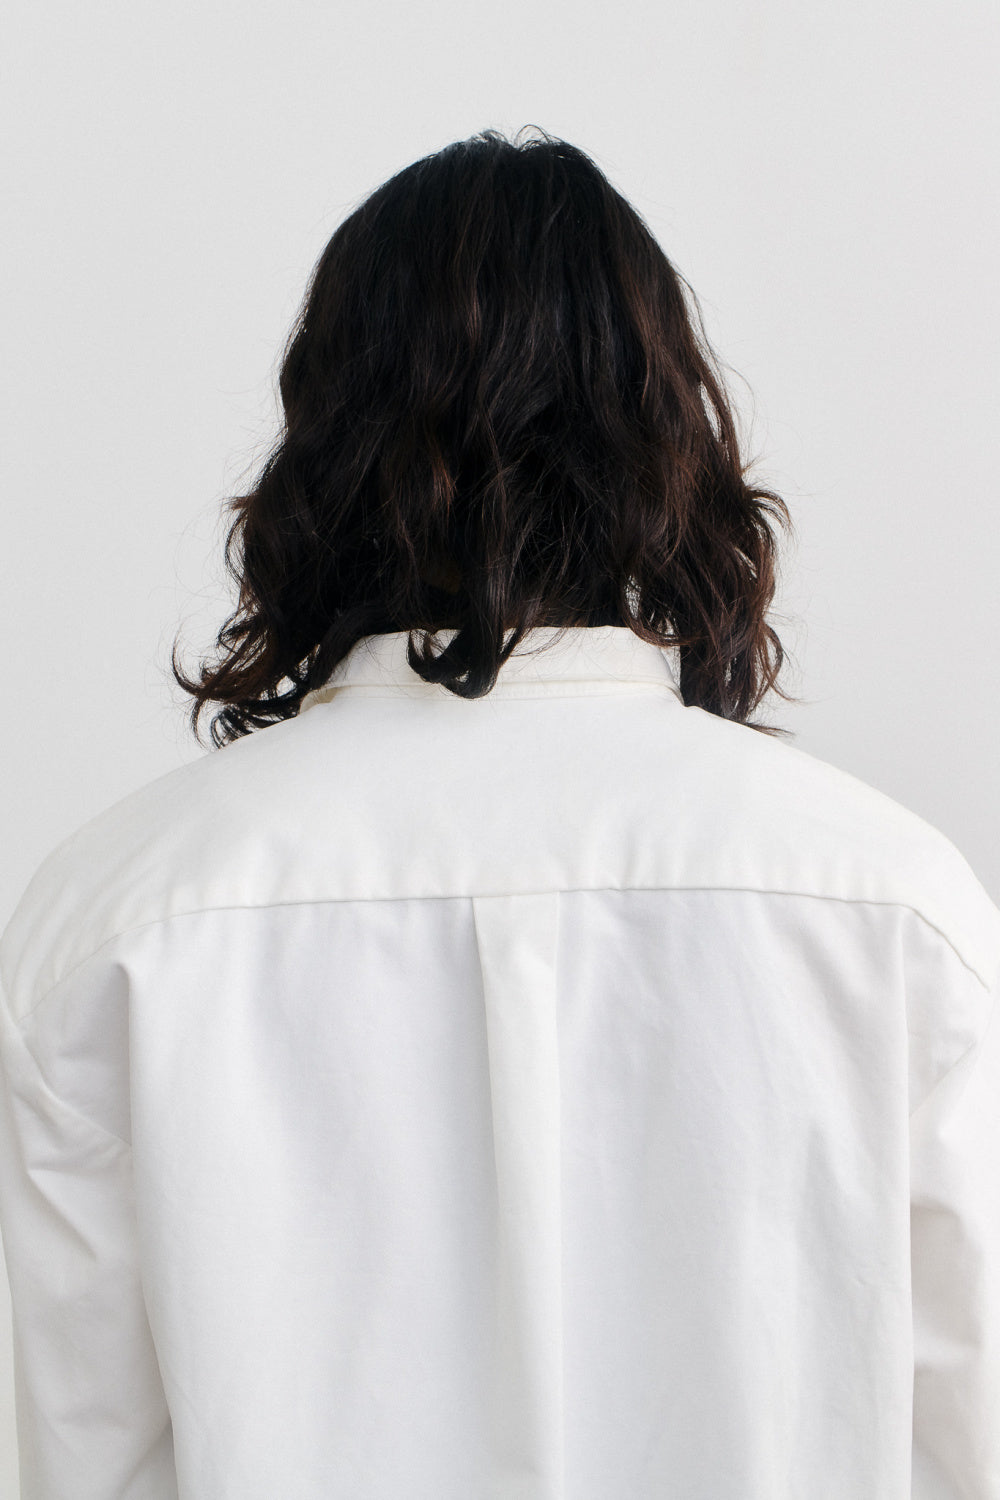 A Kind Of Guise - Gusto Shirt (White Denim)